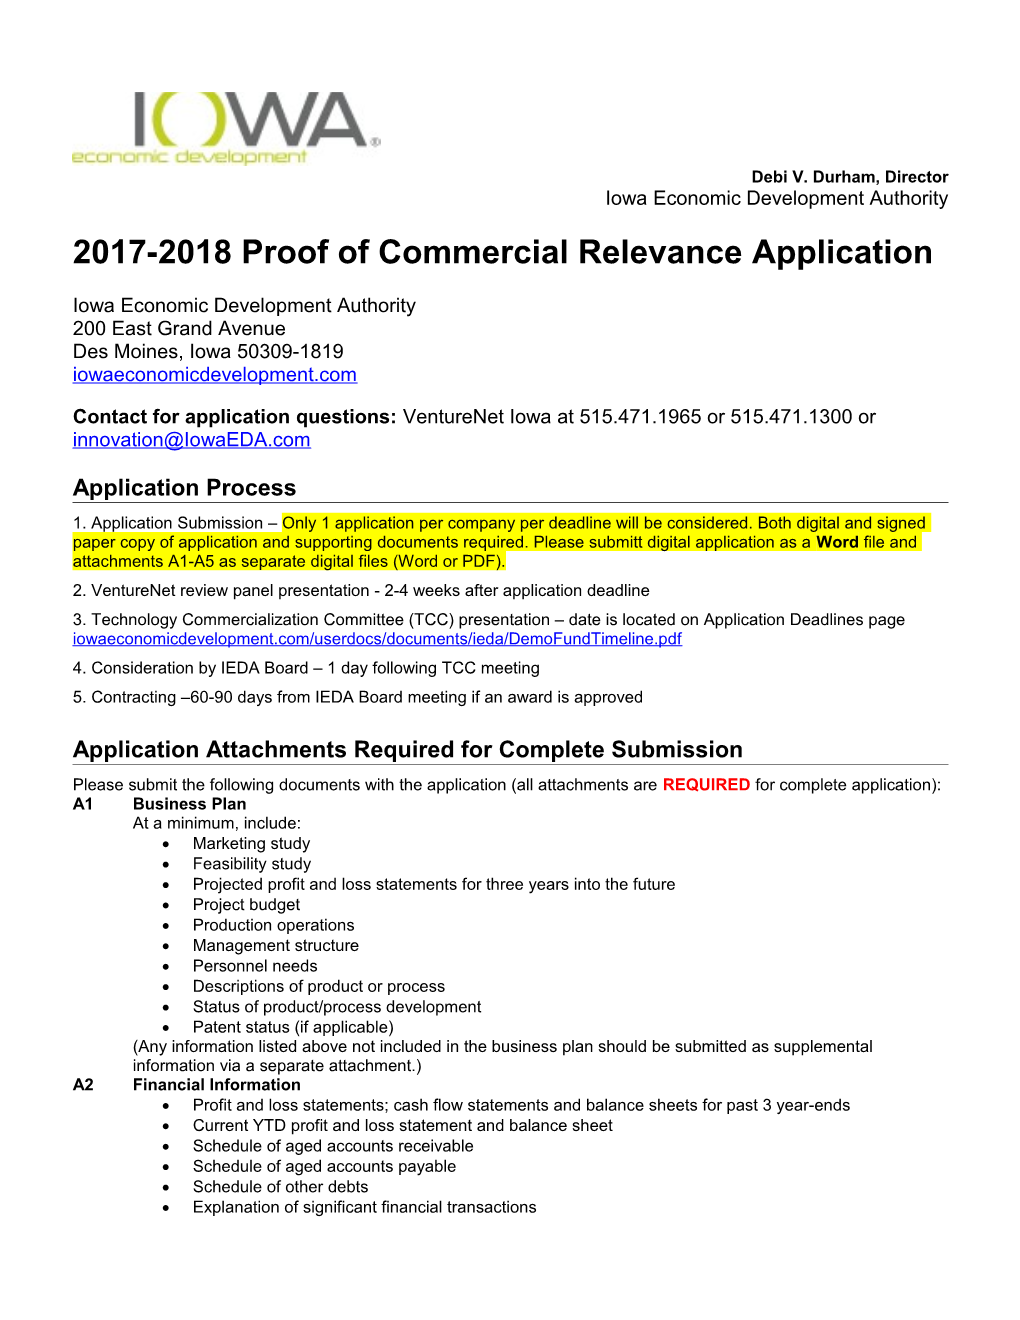 2017-2018 Proof of Commercial Relevance Application